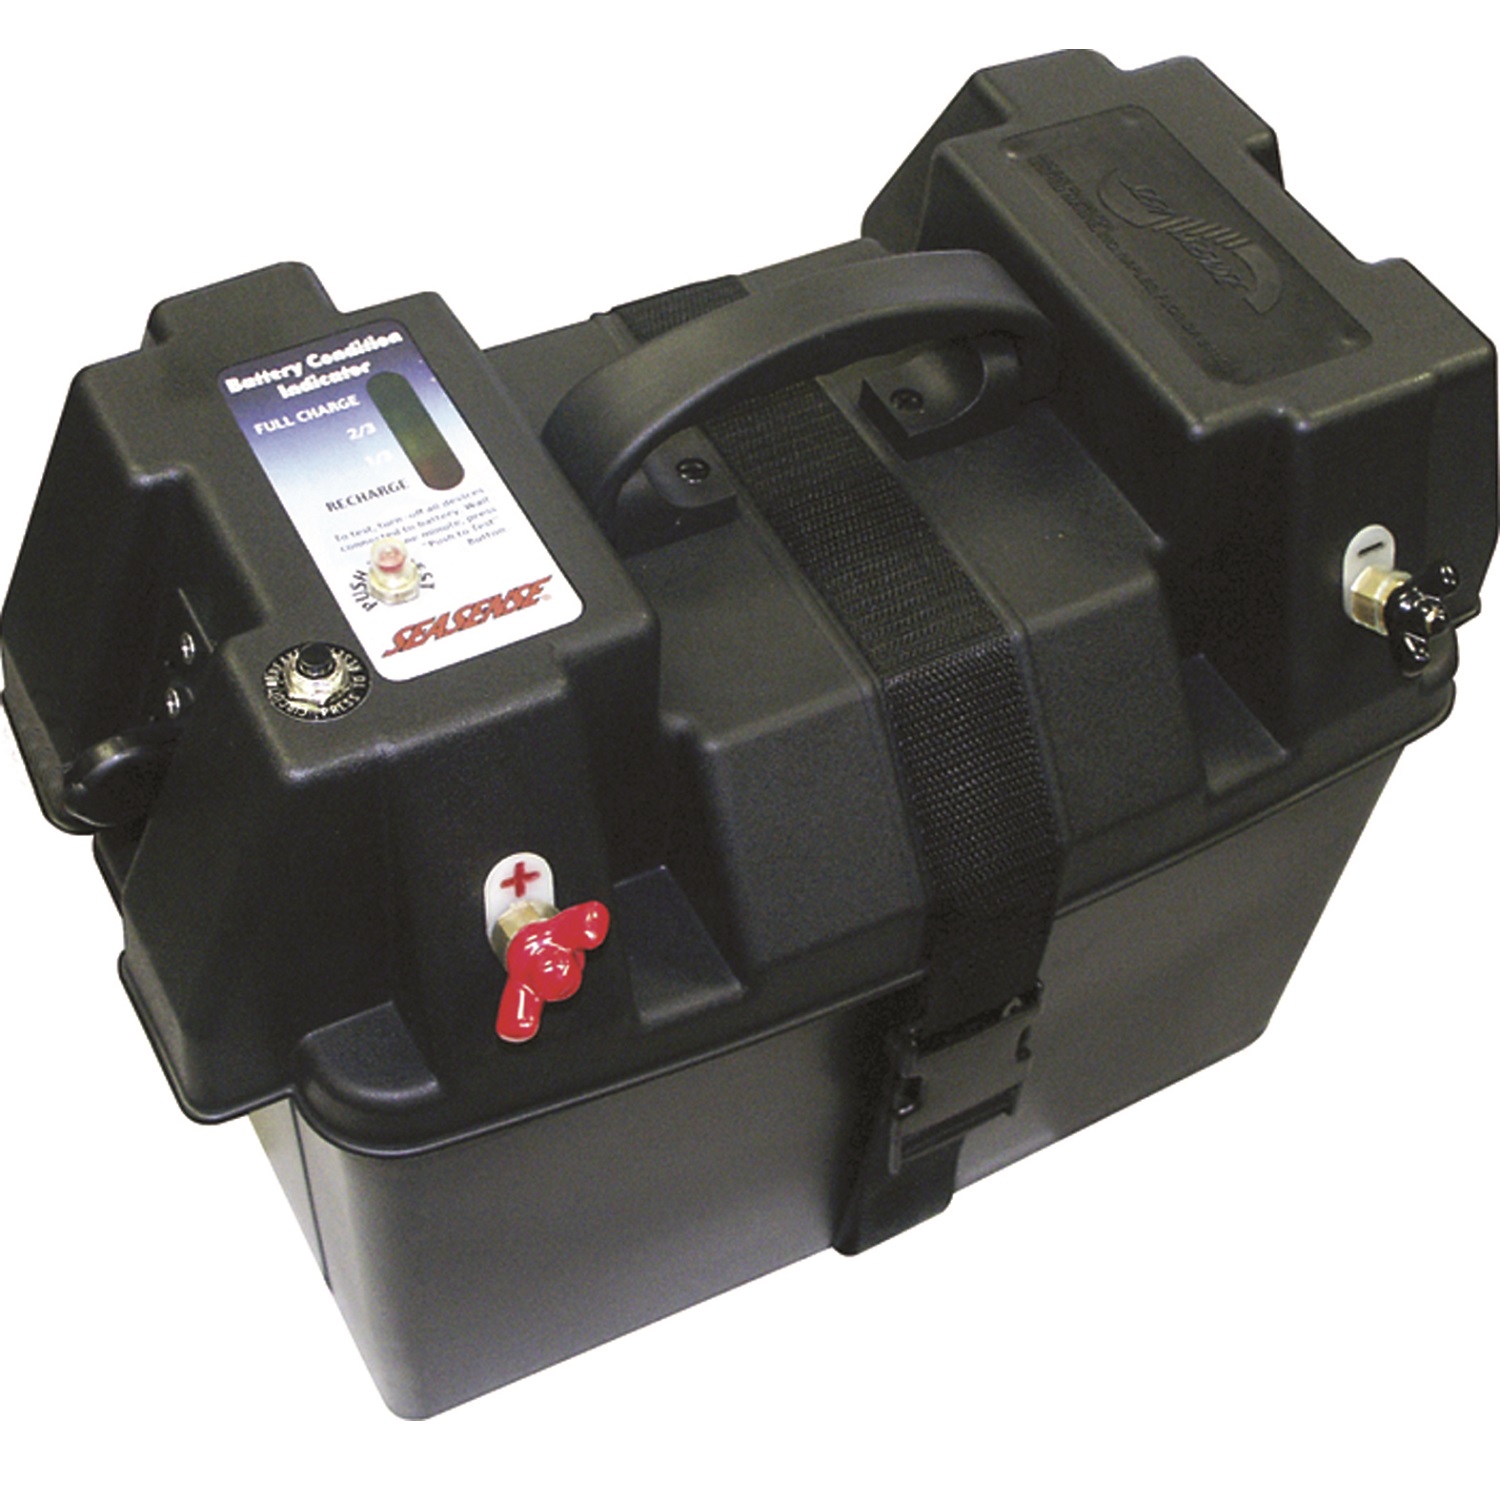 Unified Marine Deluxe Power Station Battery Box - 50090682